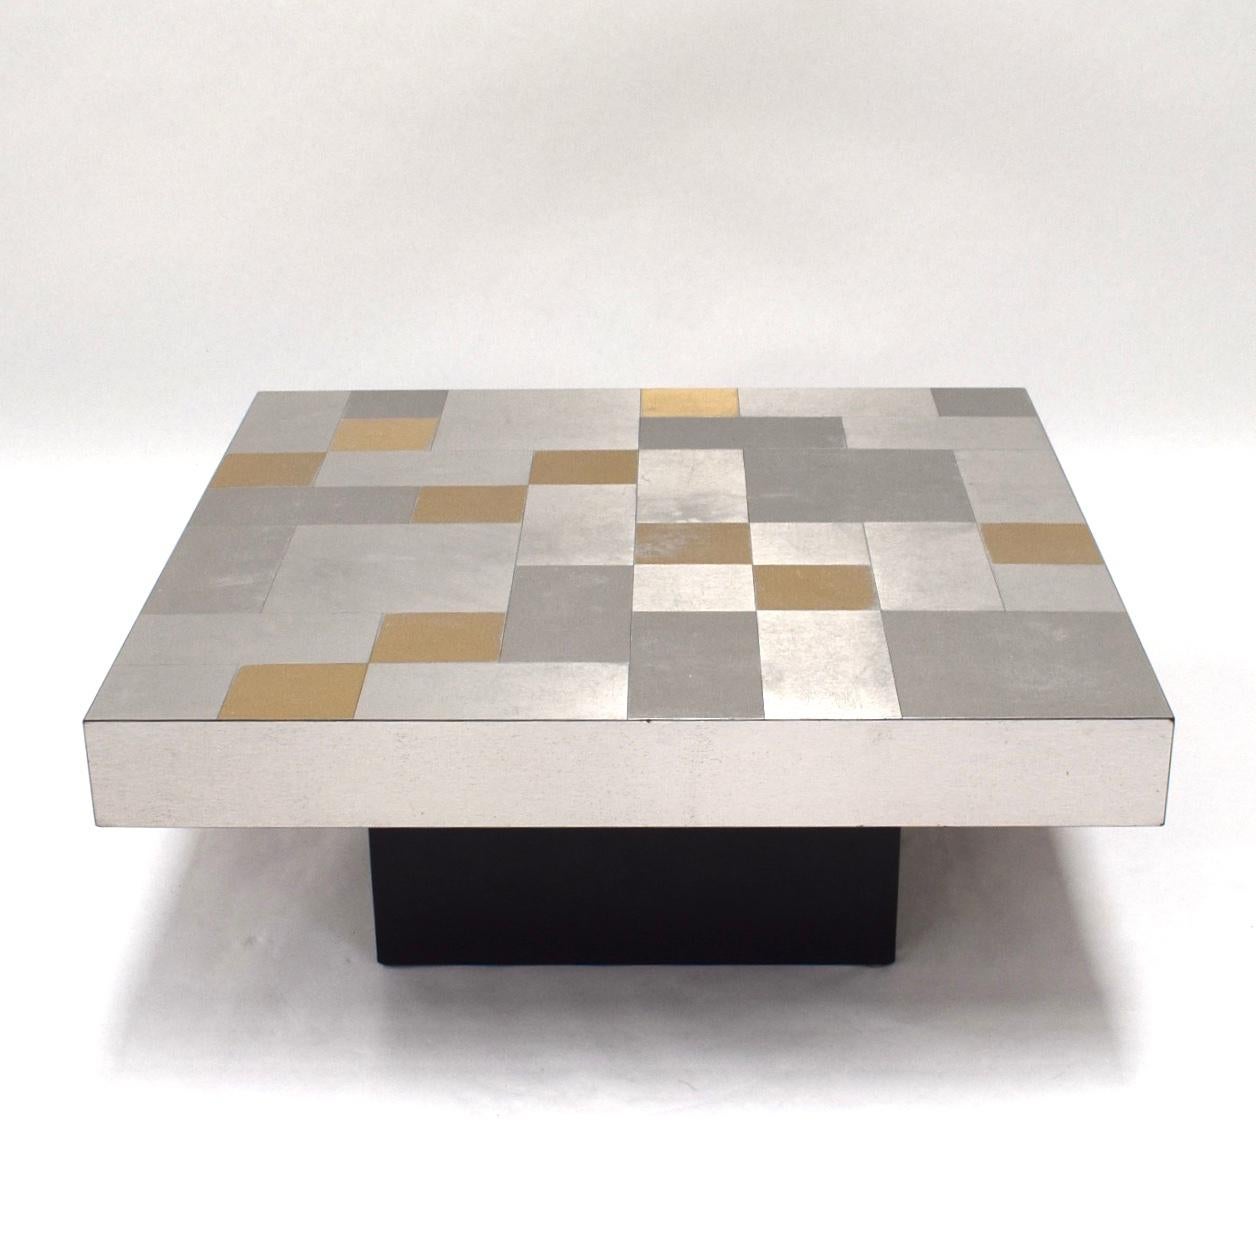 Seventies coffee table with aluminium mosaic top in silver and gold color.

Designer: Unknown

Manufacturer: Unknown

Country: Unknown

Model: Coffee table

Material: Aluminium / Black lacquered wood

Design period: 1970s

Date of